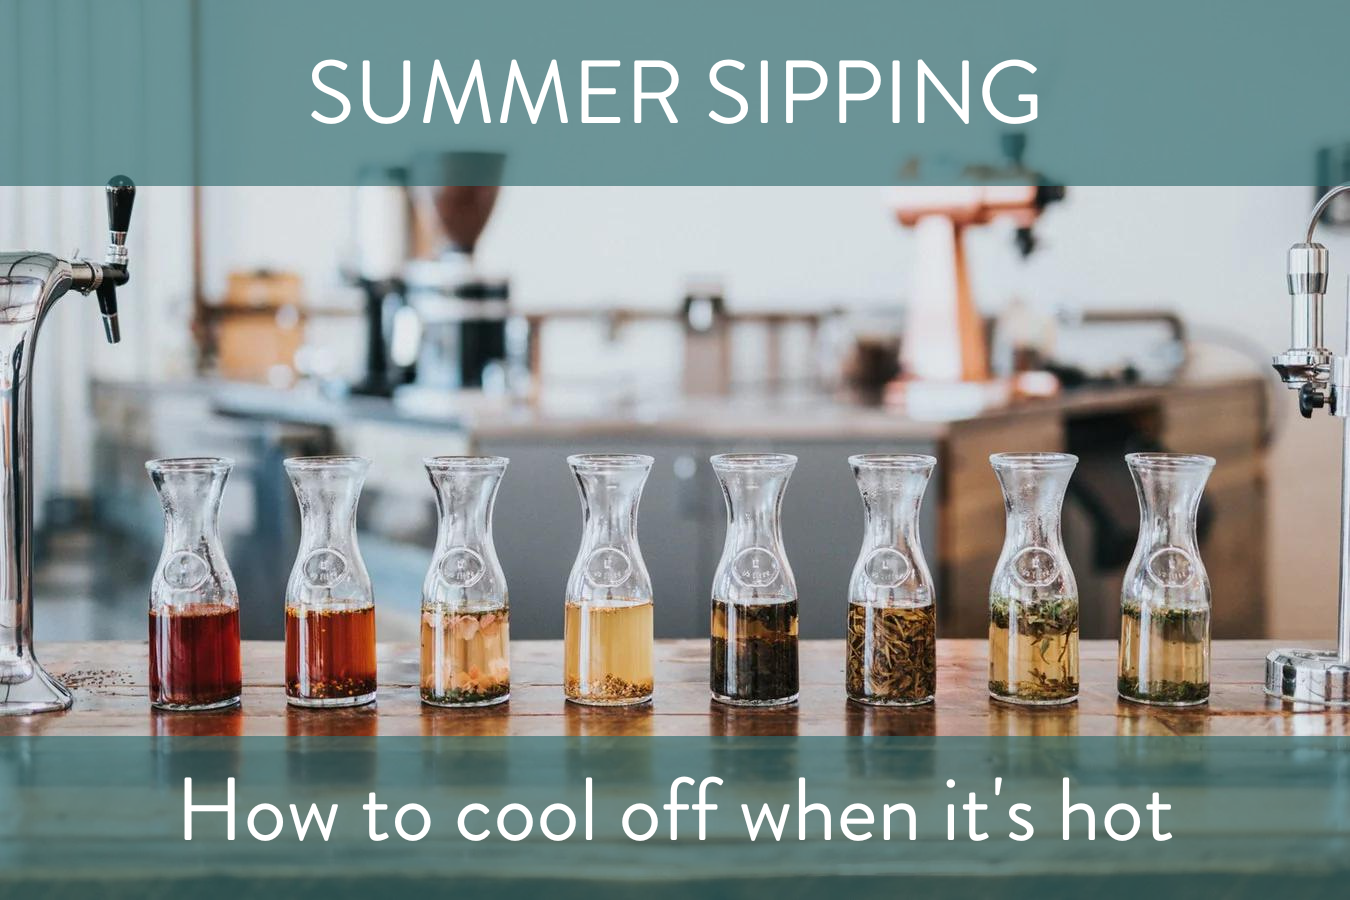 Summer Sipping: Cooling off when things get hot